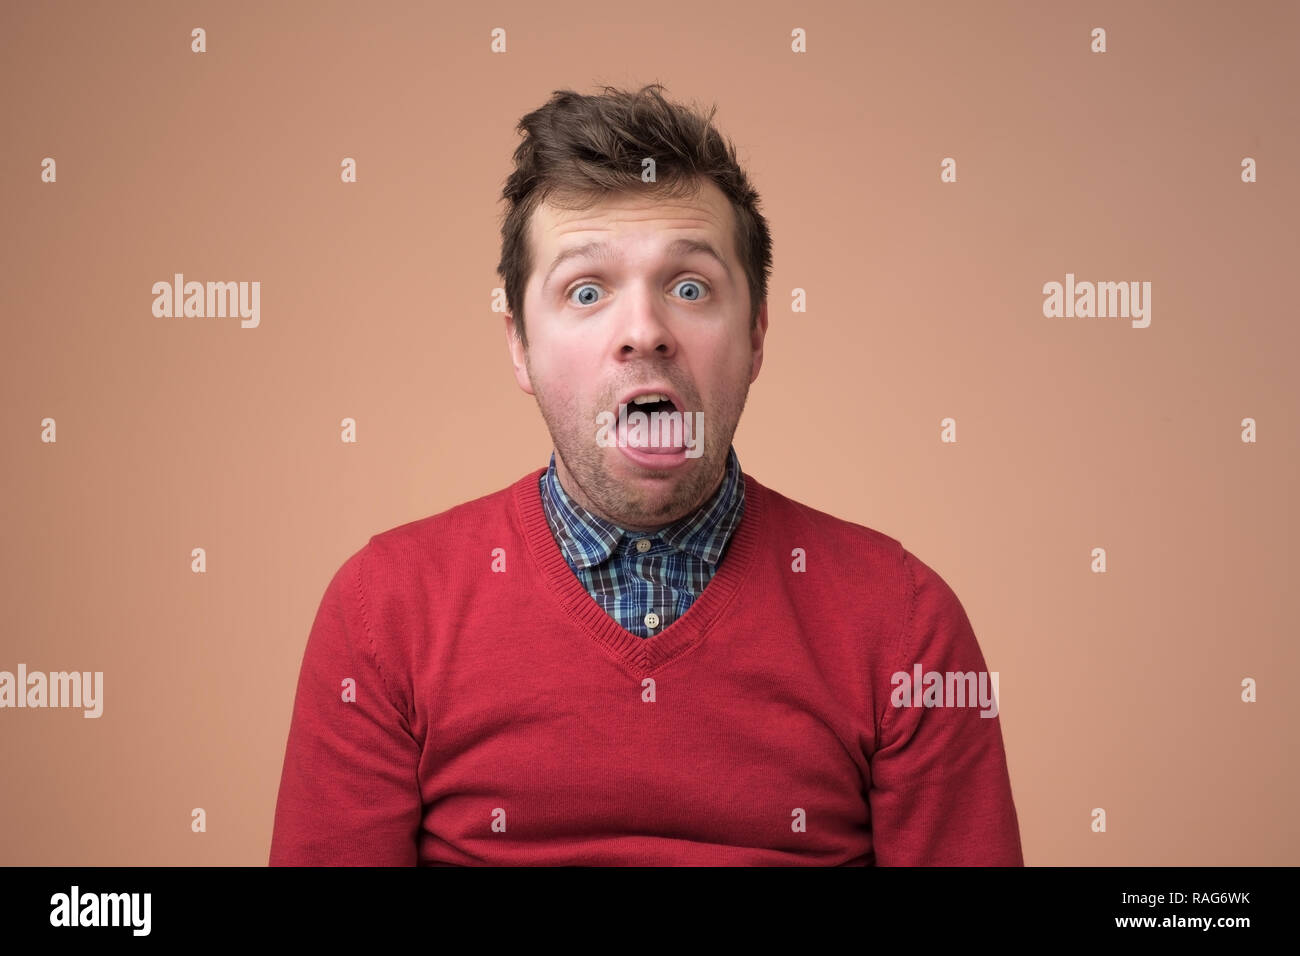 Young funny man in white shirt, gesturing shocked or surprised expression with mouth open Stock Photo